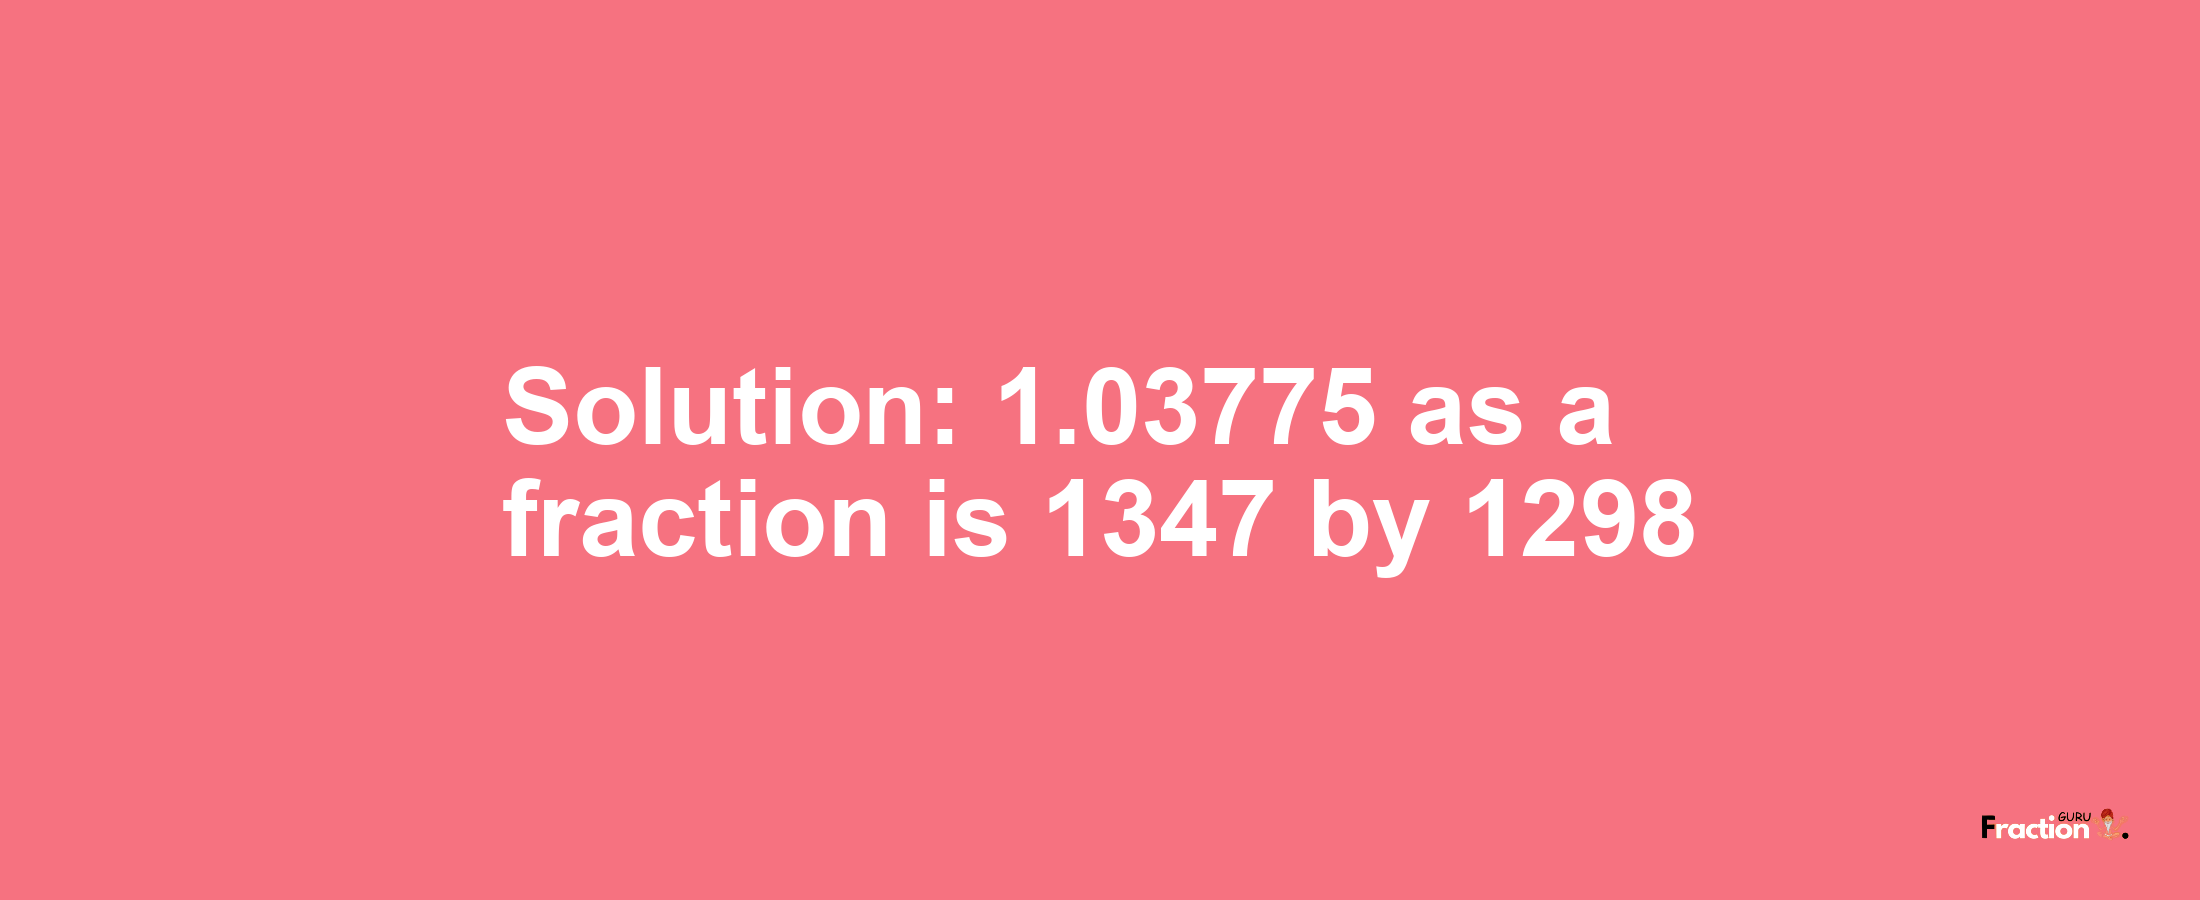 Solution:1.03775 as a fraction is 1347/1298